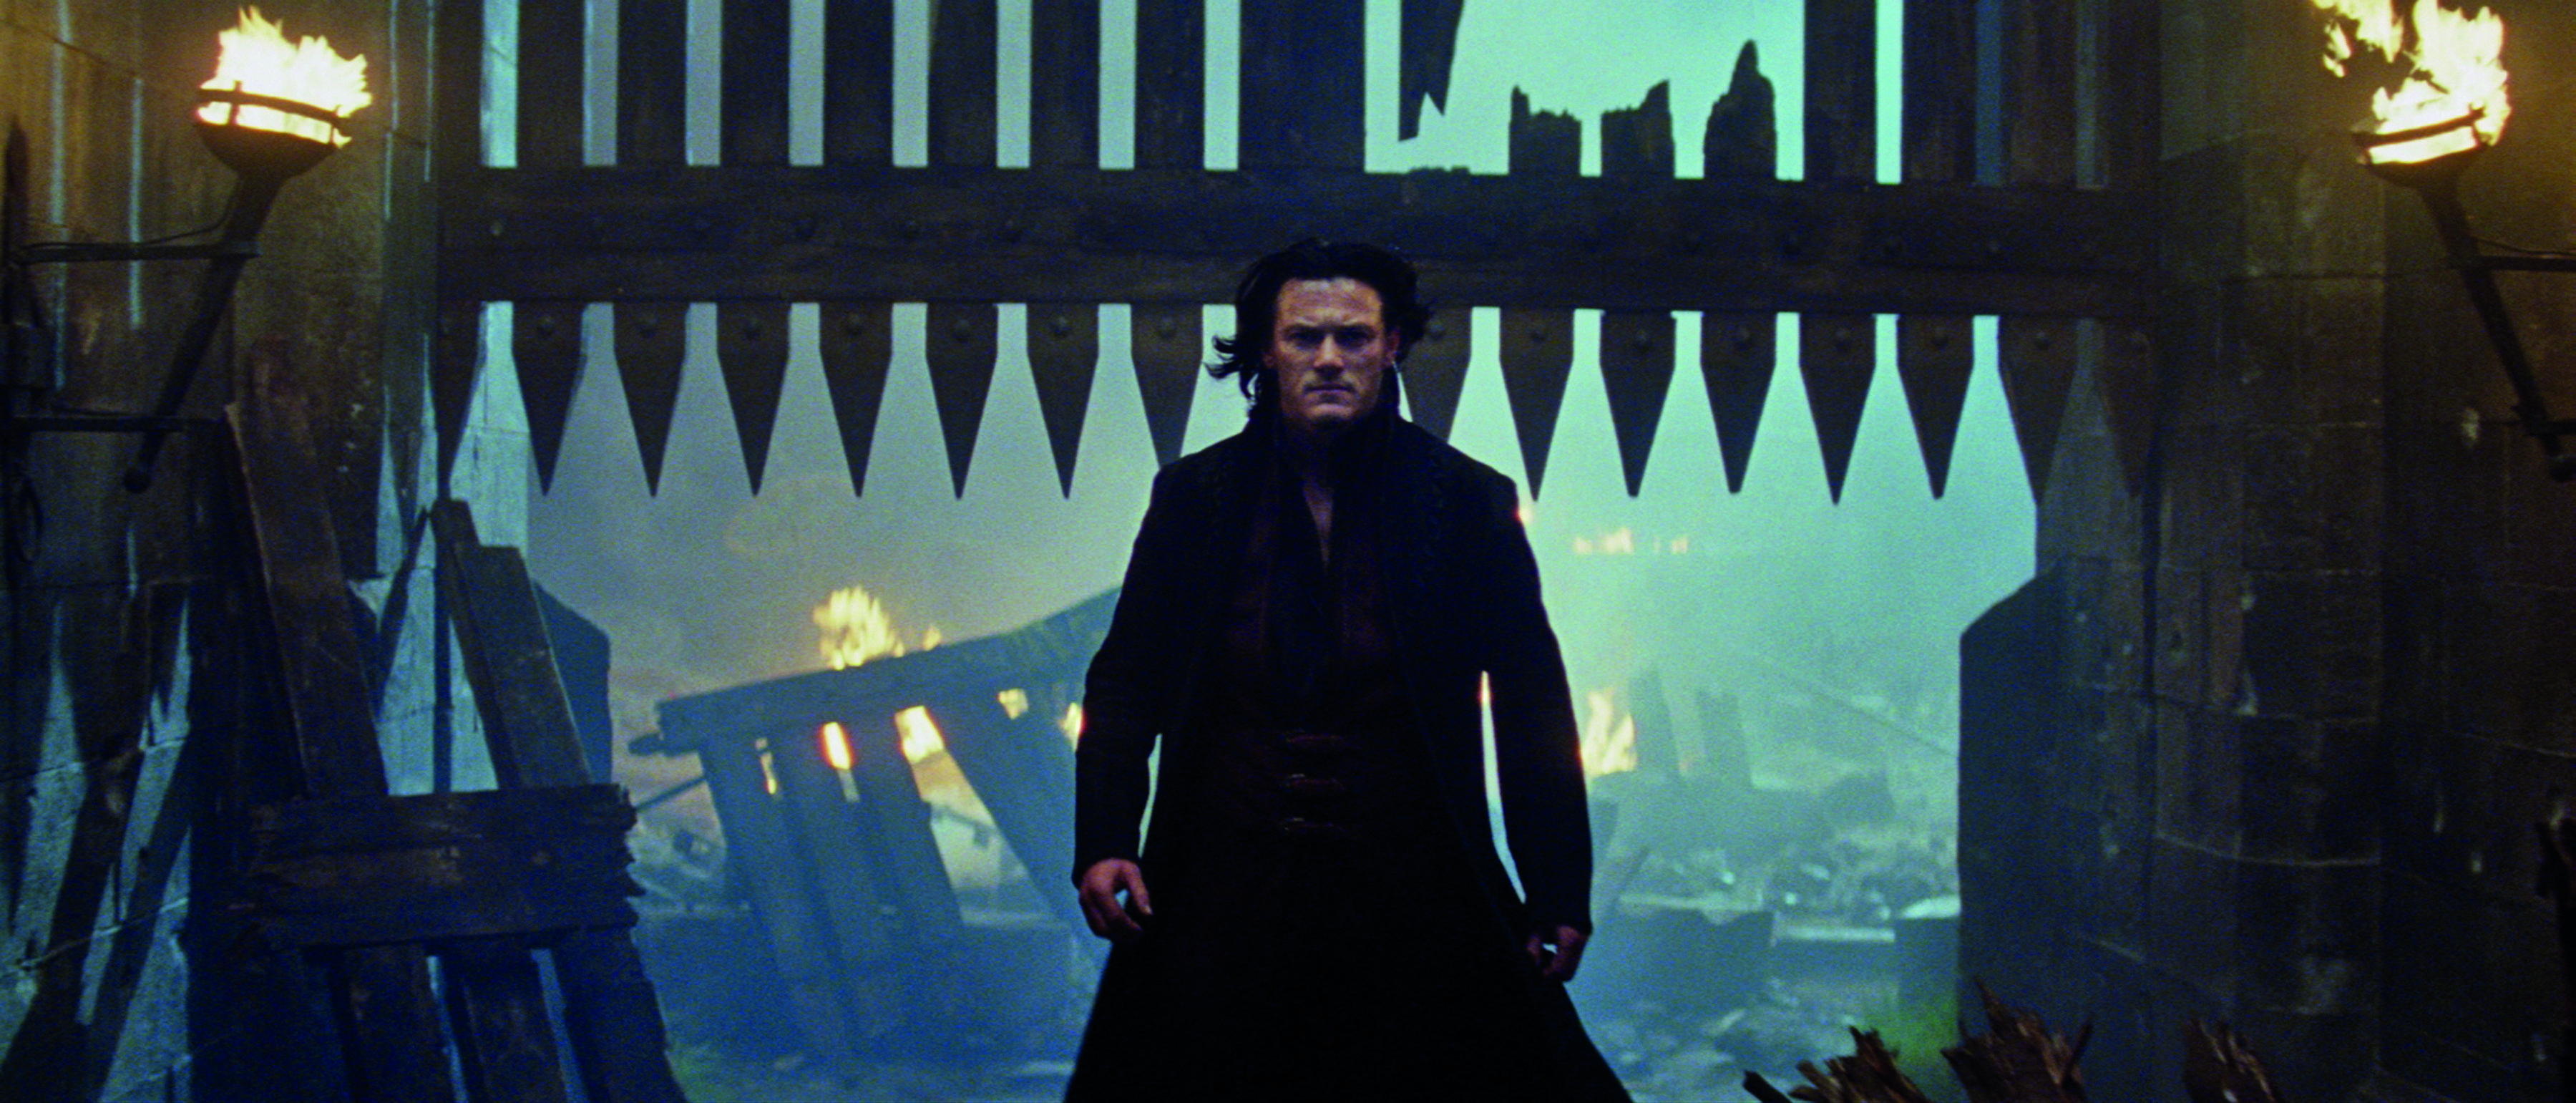 New Release Date For 'Dracula Untold'